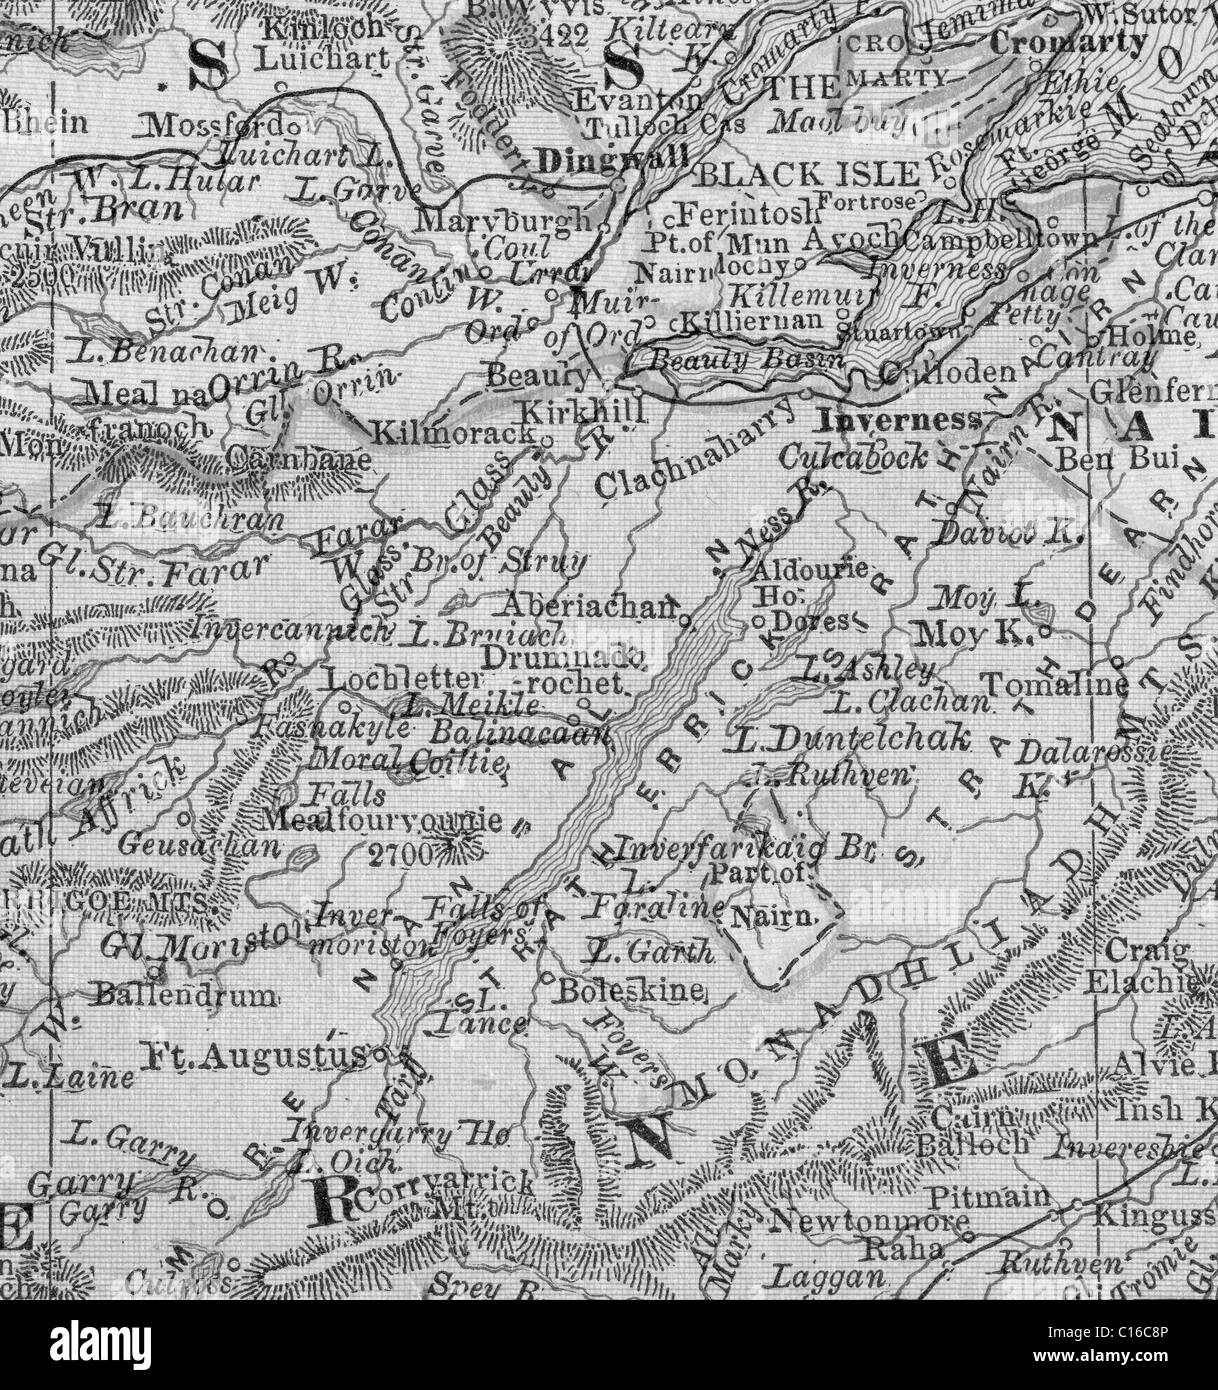 Old map of Loch Ness from original geography textbook, 1884 Stock Photo